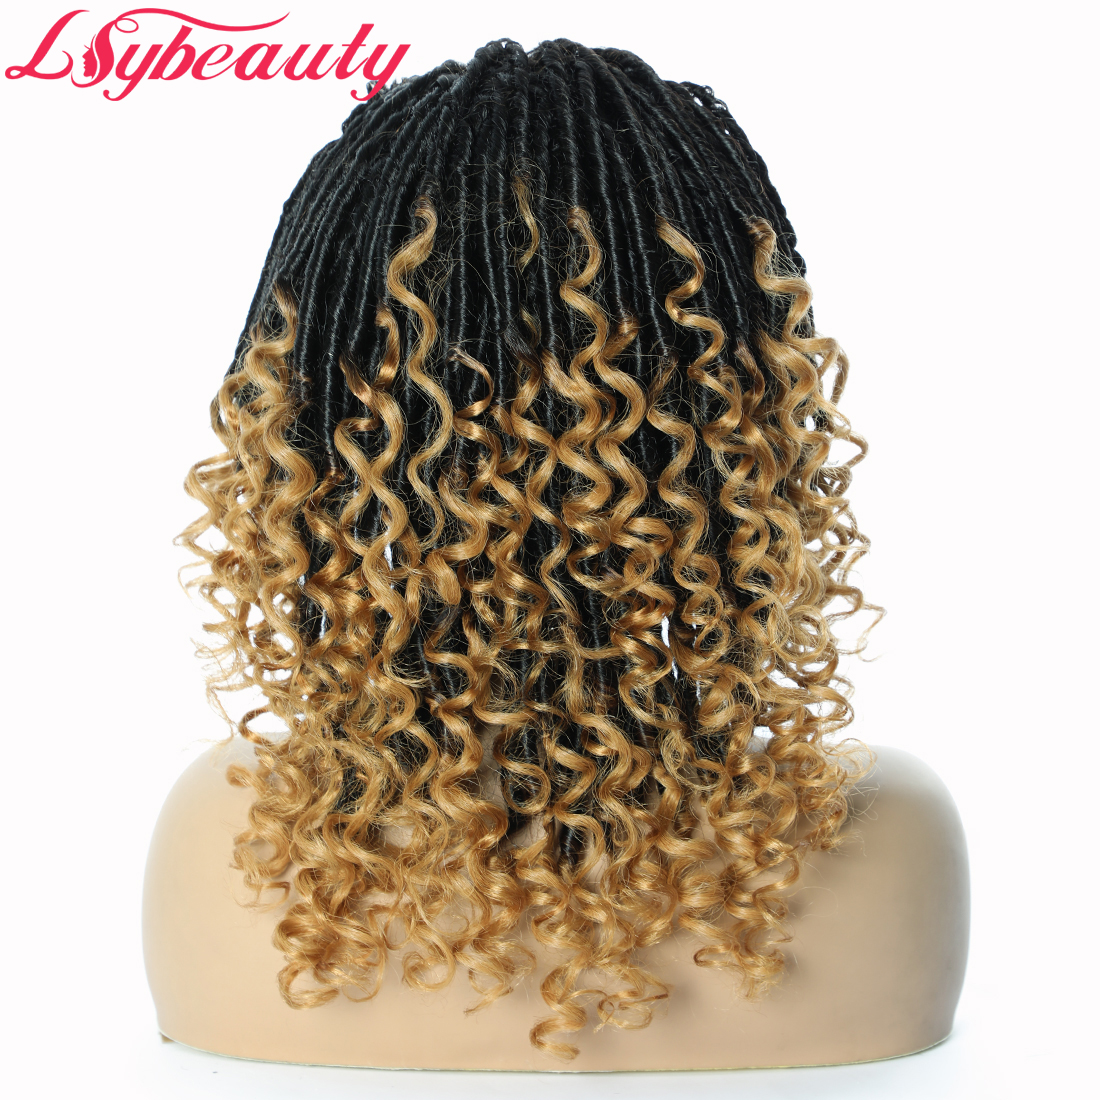 LSY Throw On And Go Super Easy Headband Wigs 100 Non Lace Glueless Human Hair Half Human Wigs